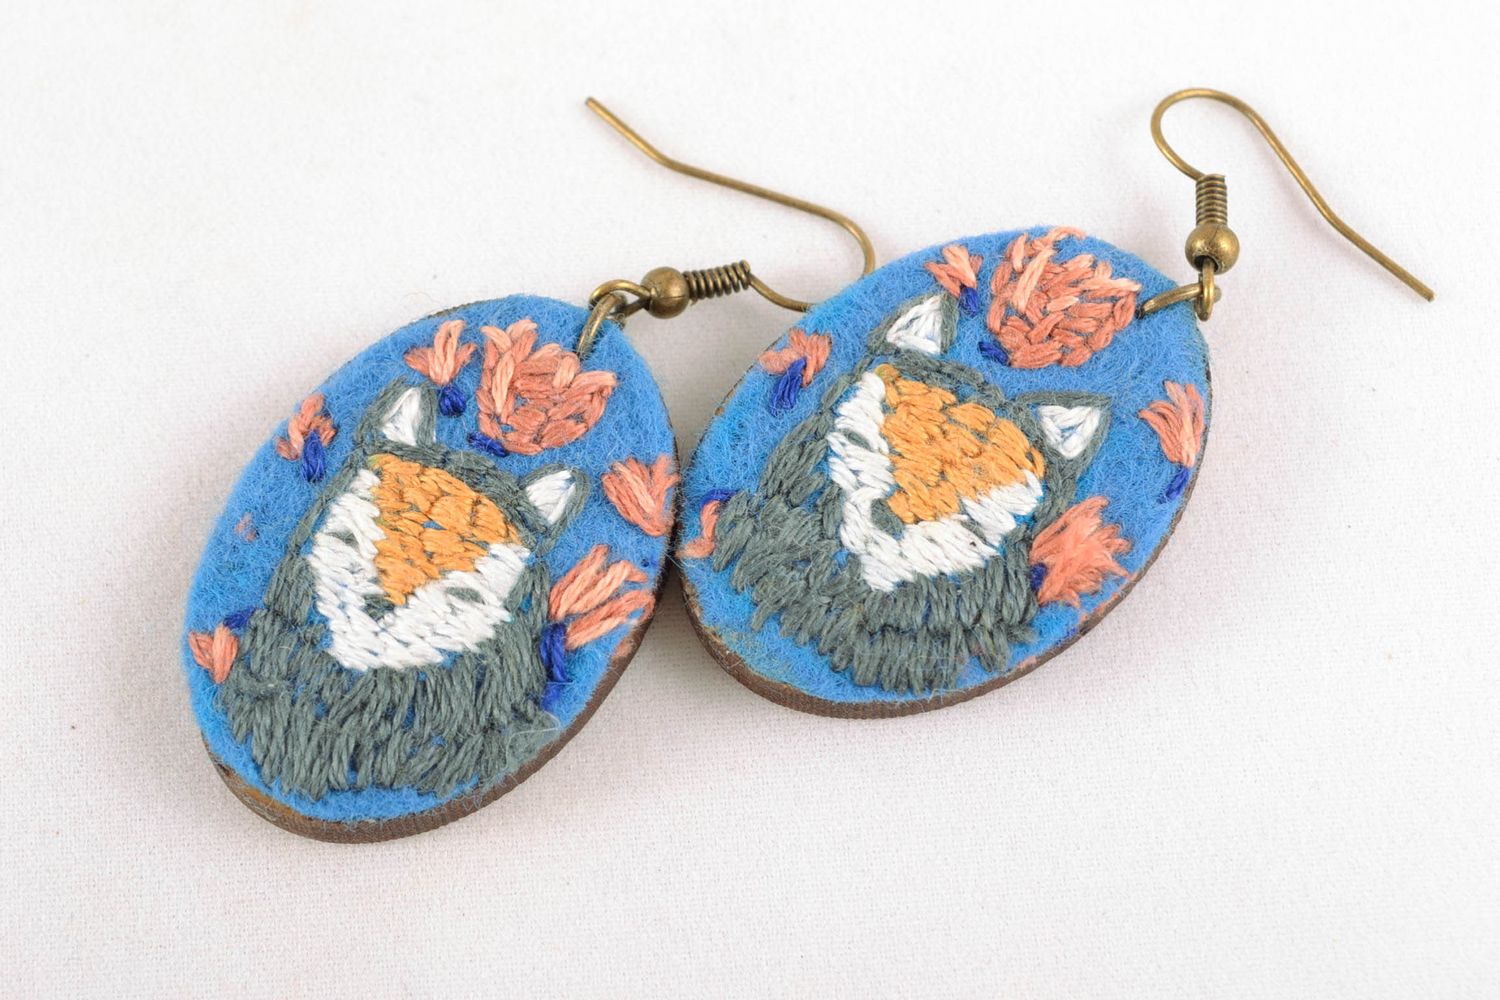 Handmade wooden and felt earrings with satin stitch embroidery photo 3